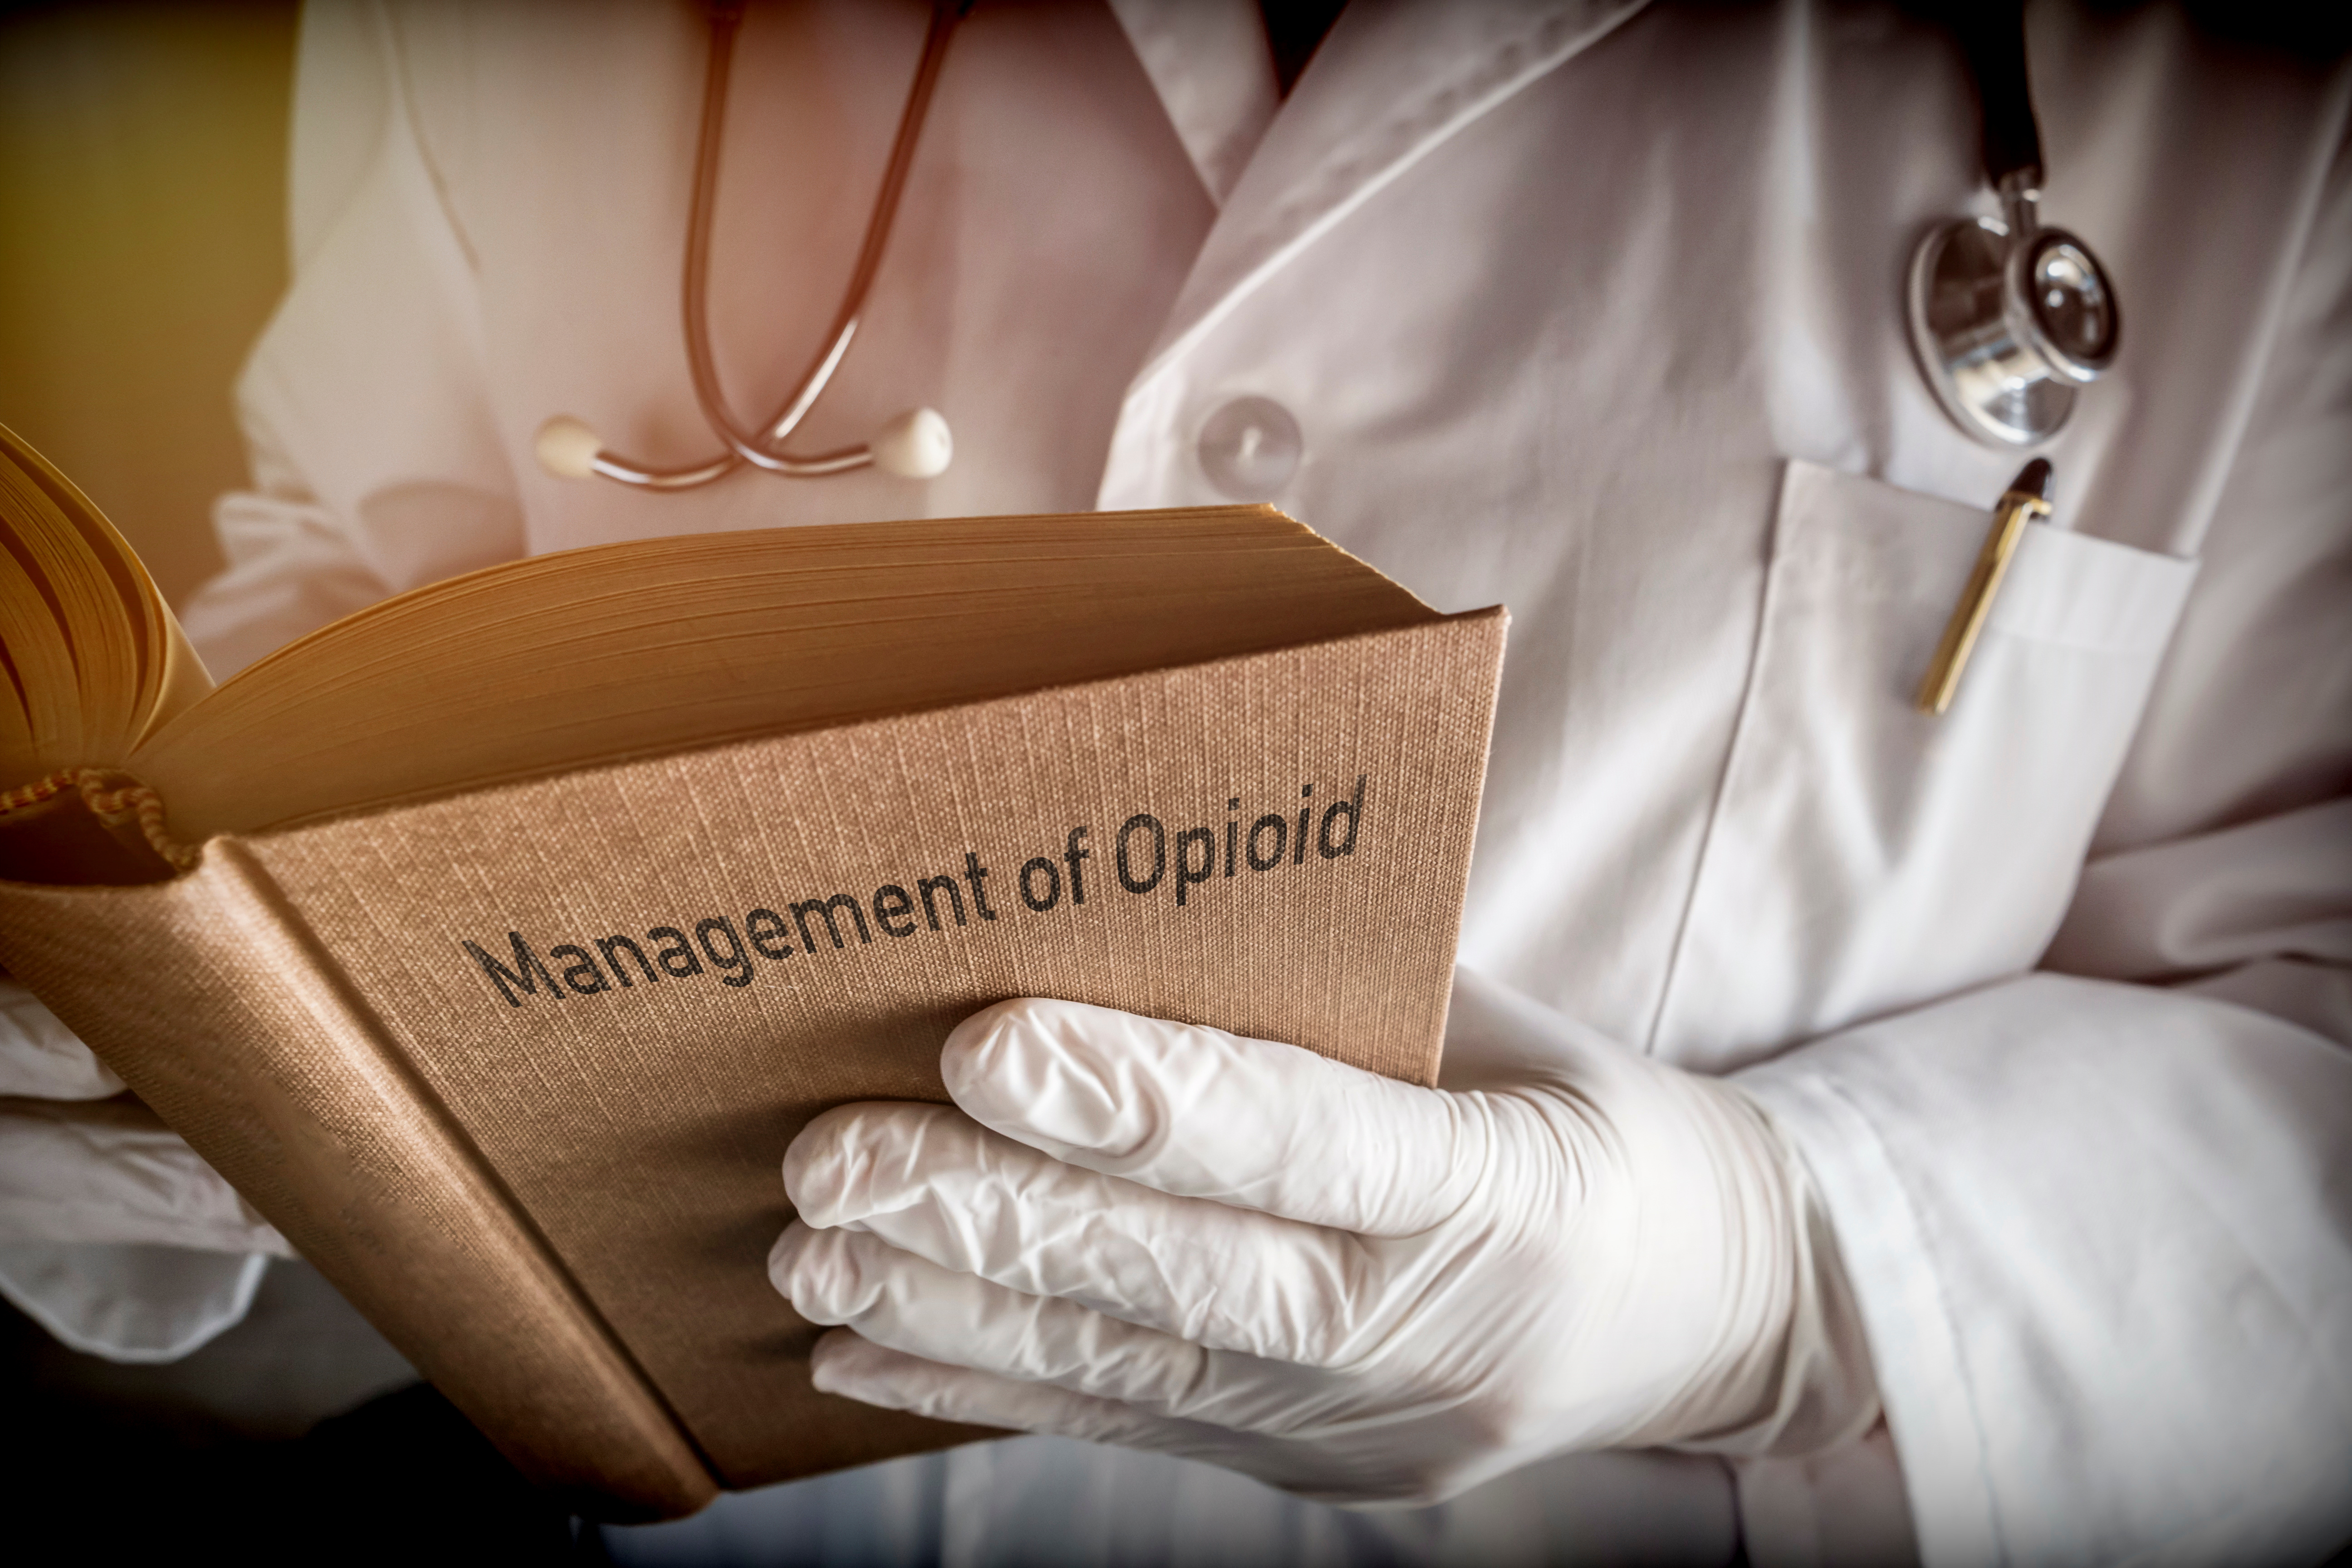 Doctor holds book on Management of Opioid, conceptual image